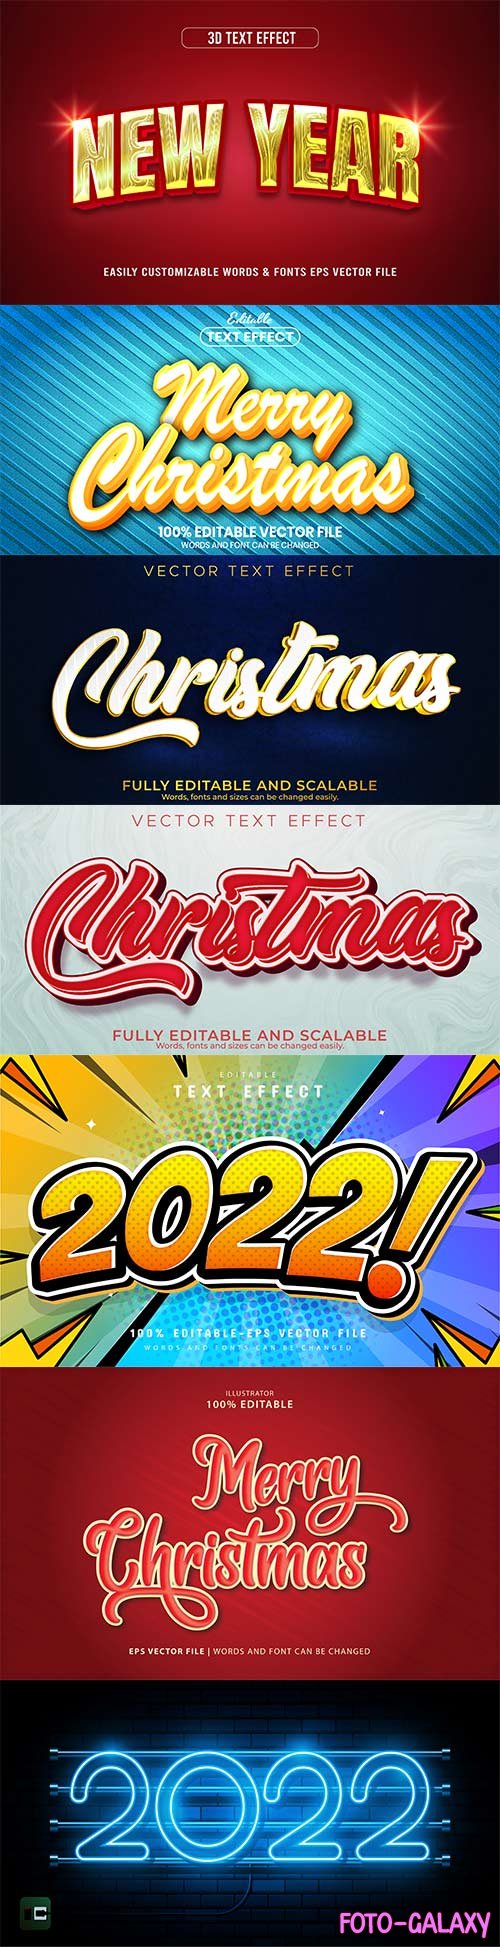 Christmas and New Year 3d editable text style effect vector vol 259